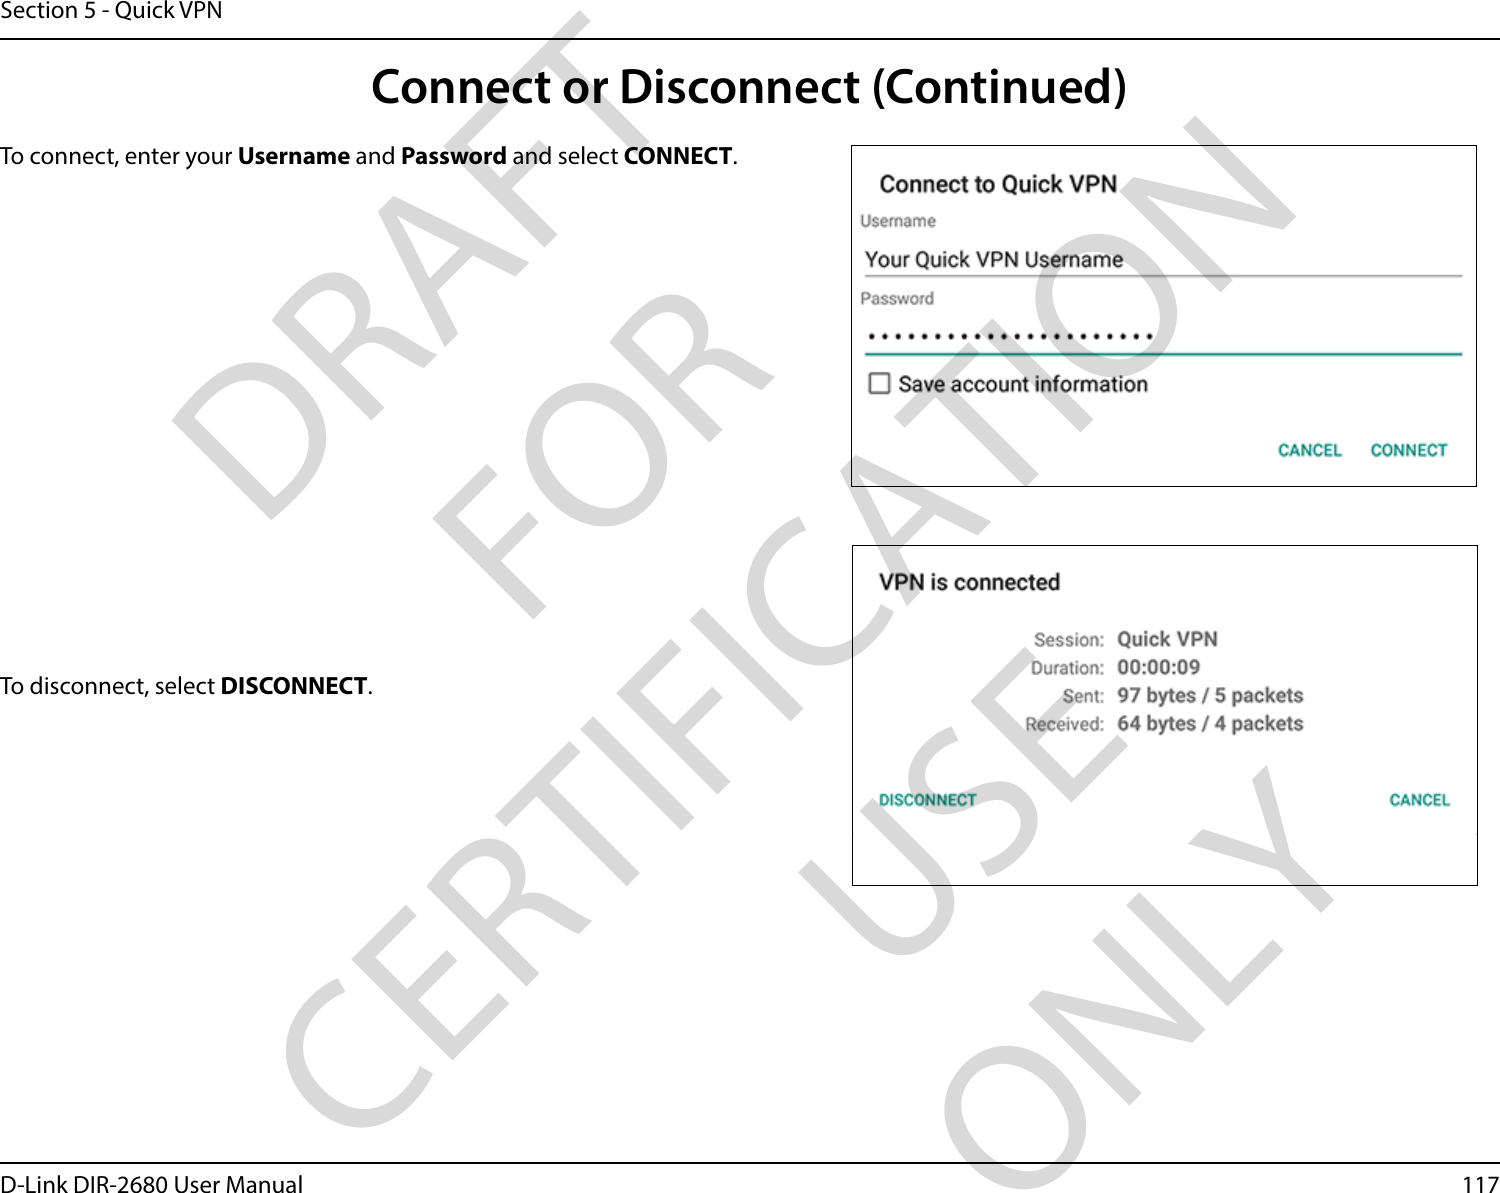 117D-Link DIR-2680 User ManualSection 5 - Quick VPNTo connect, enter your Username and Password and select CONNECT.To disconnect, select DISCONNECT.Connect or Disconnect (Continued)DRAFT FOR CERTIFICATION USE ONLY